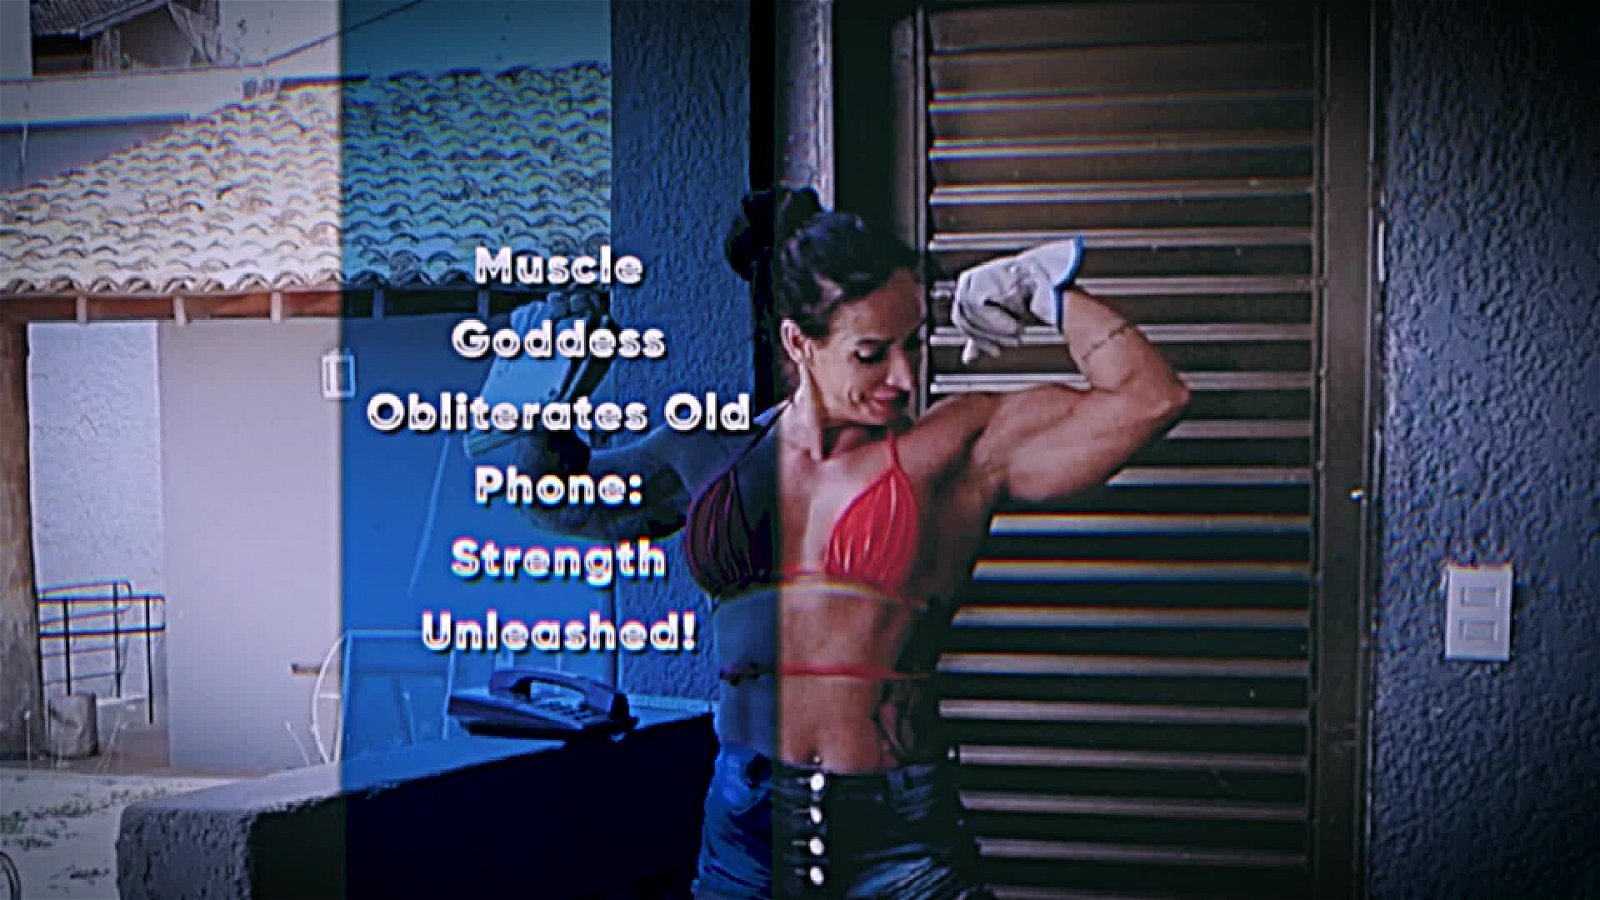 Photo by MusclegirlStrength with the username @MusclegirlStrength, who is a brand user,  January 5, 2024 at 3:20 PM and the text says 'Muscle Goddess Obliterates Old Phone: Strength Unleashed!
Link: https://bit.ly/3ks9OpW

Join the #MuscleWomenRevolution and witness the awe-inspiring power of Gil Cunha. Admire her incredible strength and flexed muscles 💪💥 
Dont miss out on our..'